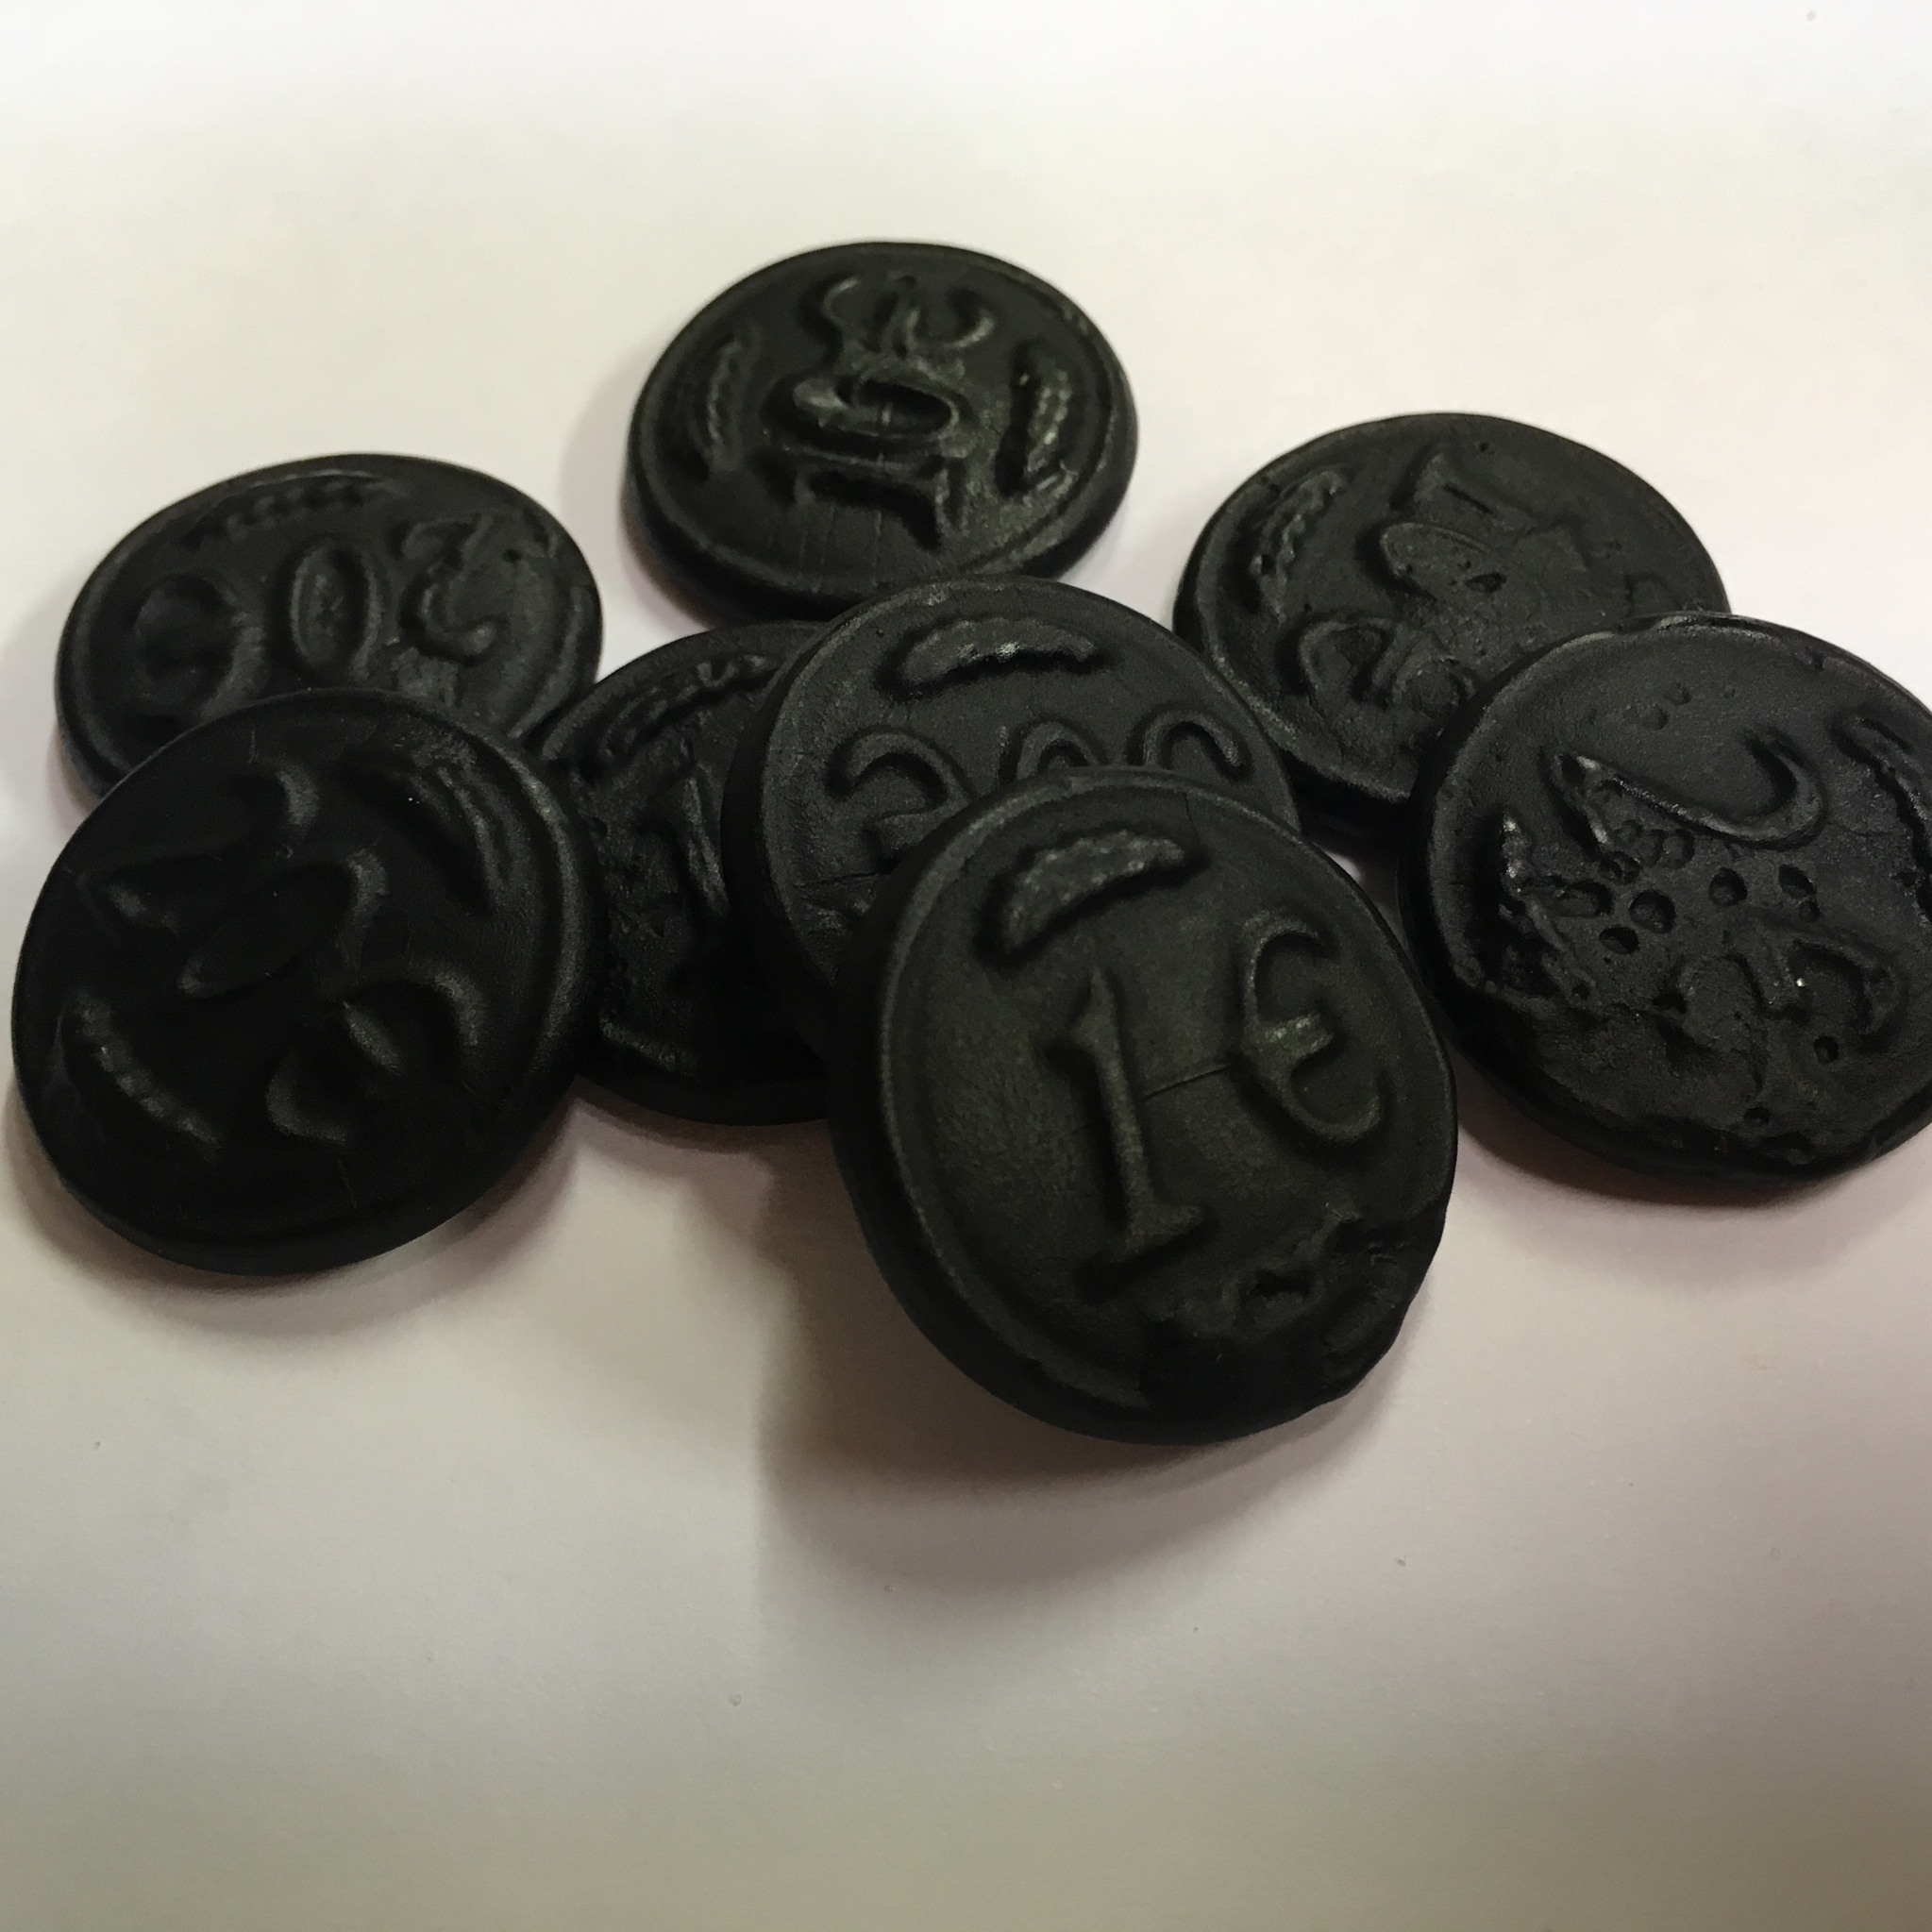 Coin shaped black licorice